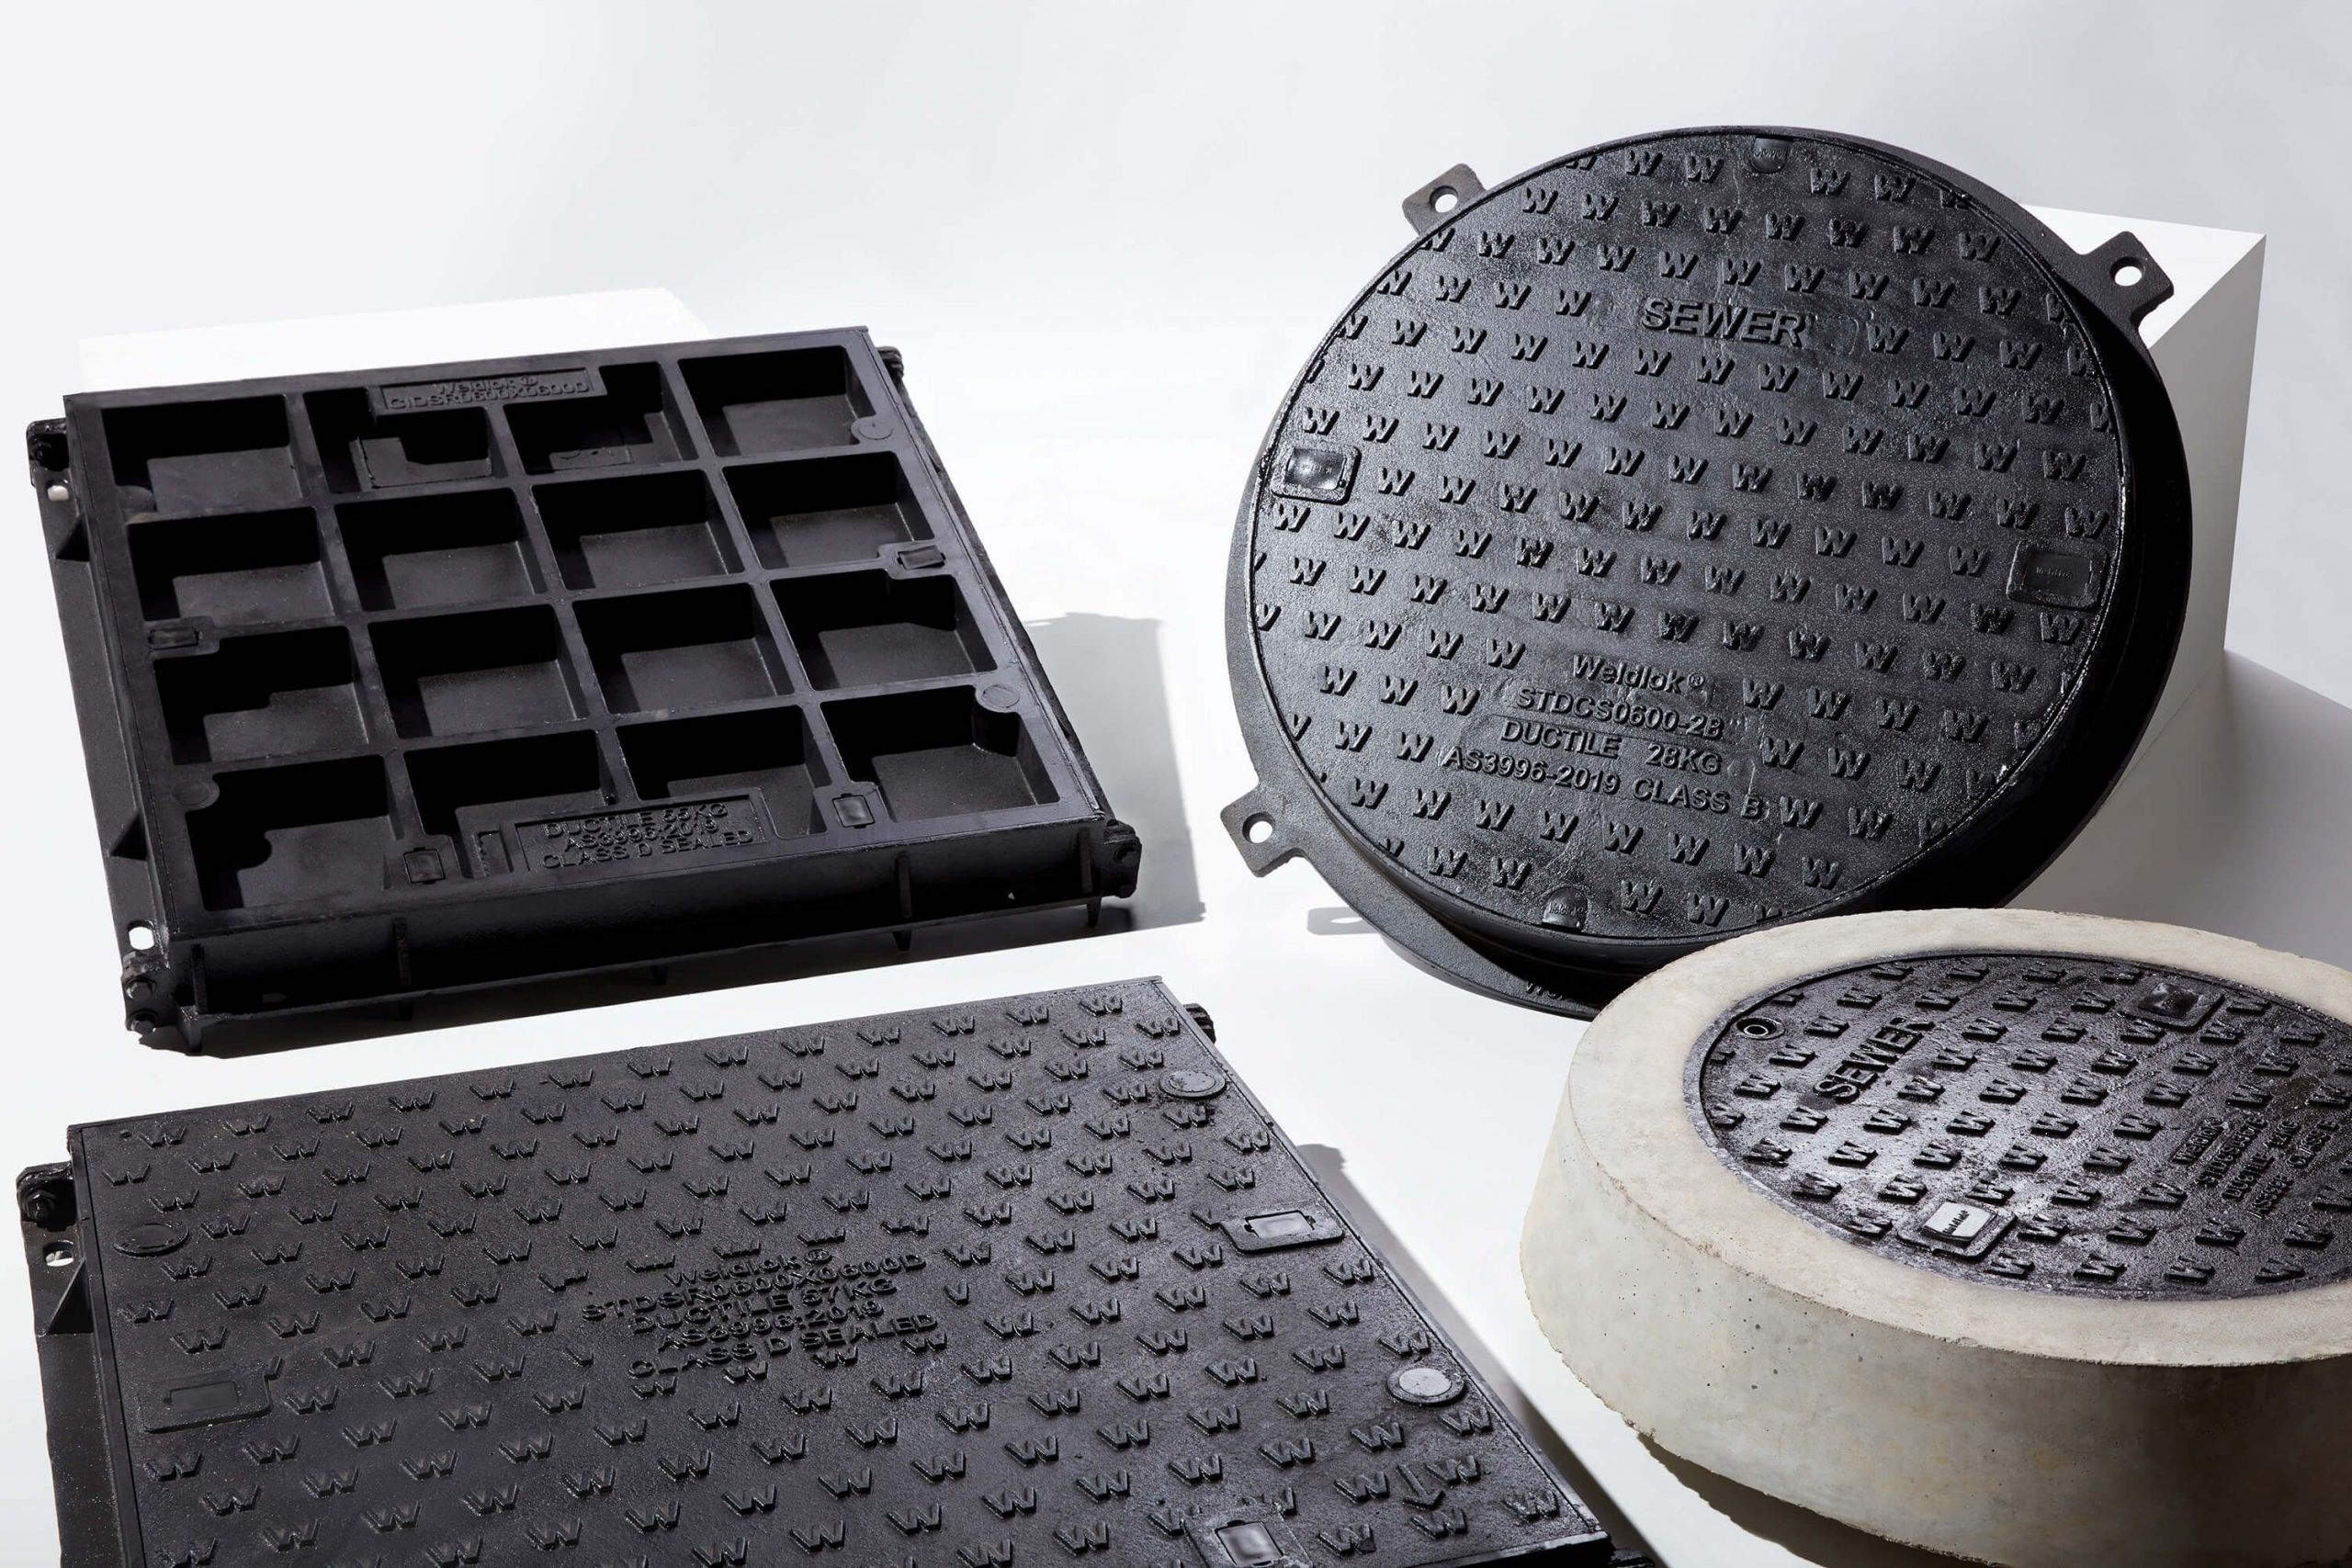 ductile iron covers and grates